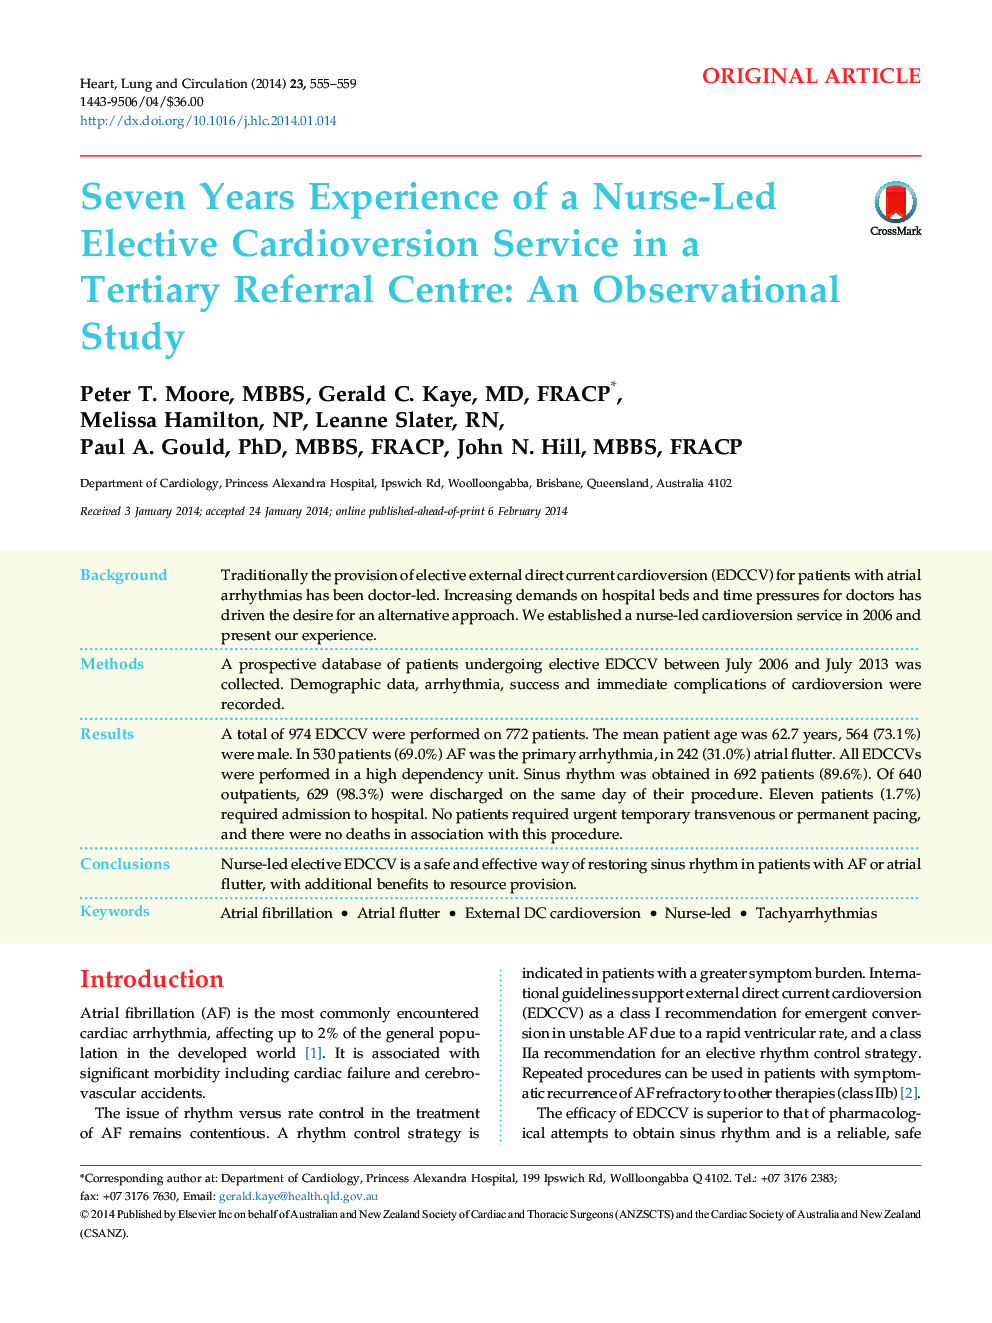 Seven Years Experience of a Nurse-Led Elective Cardioversion Service in a Tertiary Referral Centre: An Observational Study